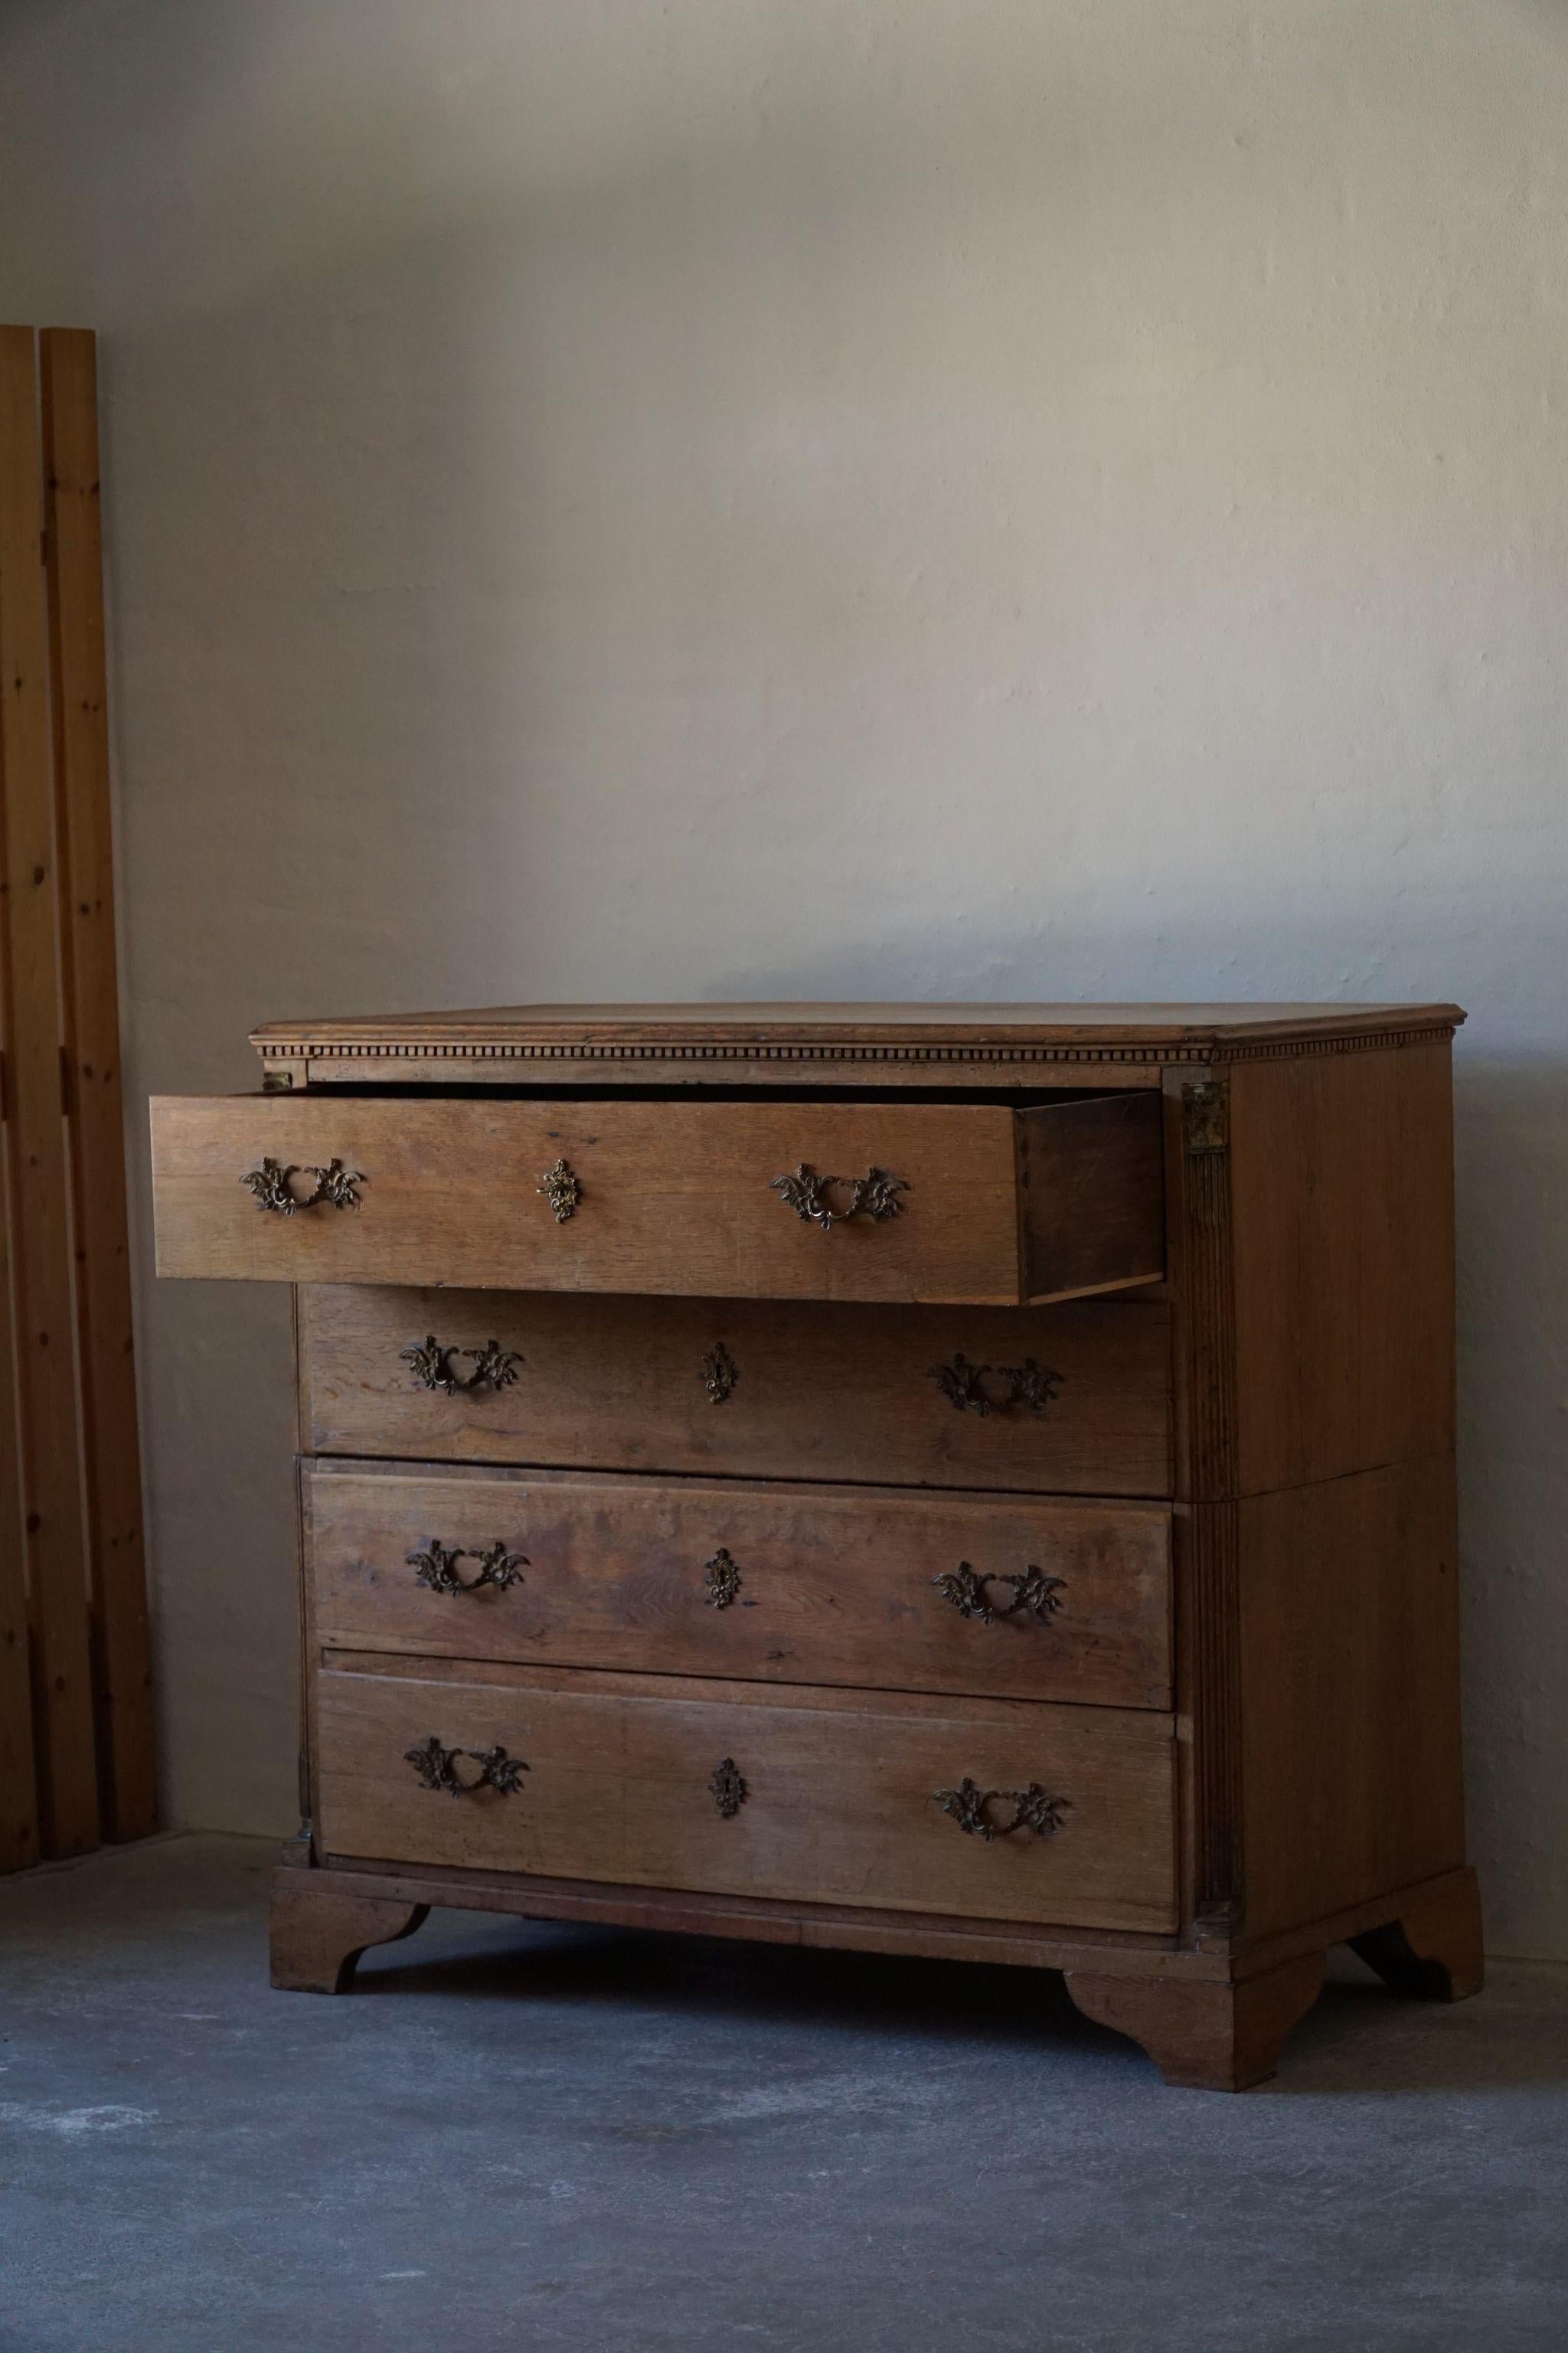 Hand-Carved Antique Chest of Drawers in Oak, Made in Denmark, Mid-19th Century